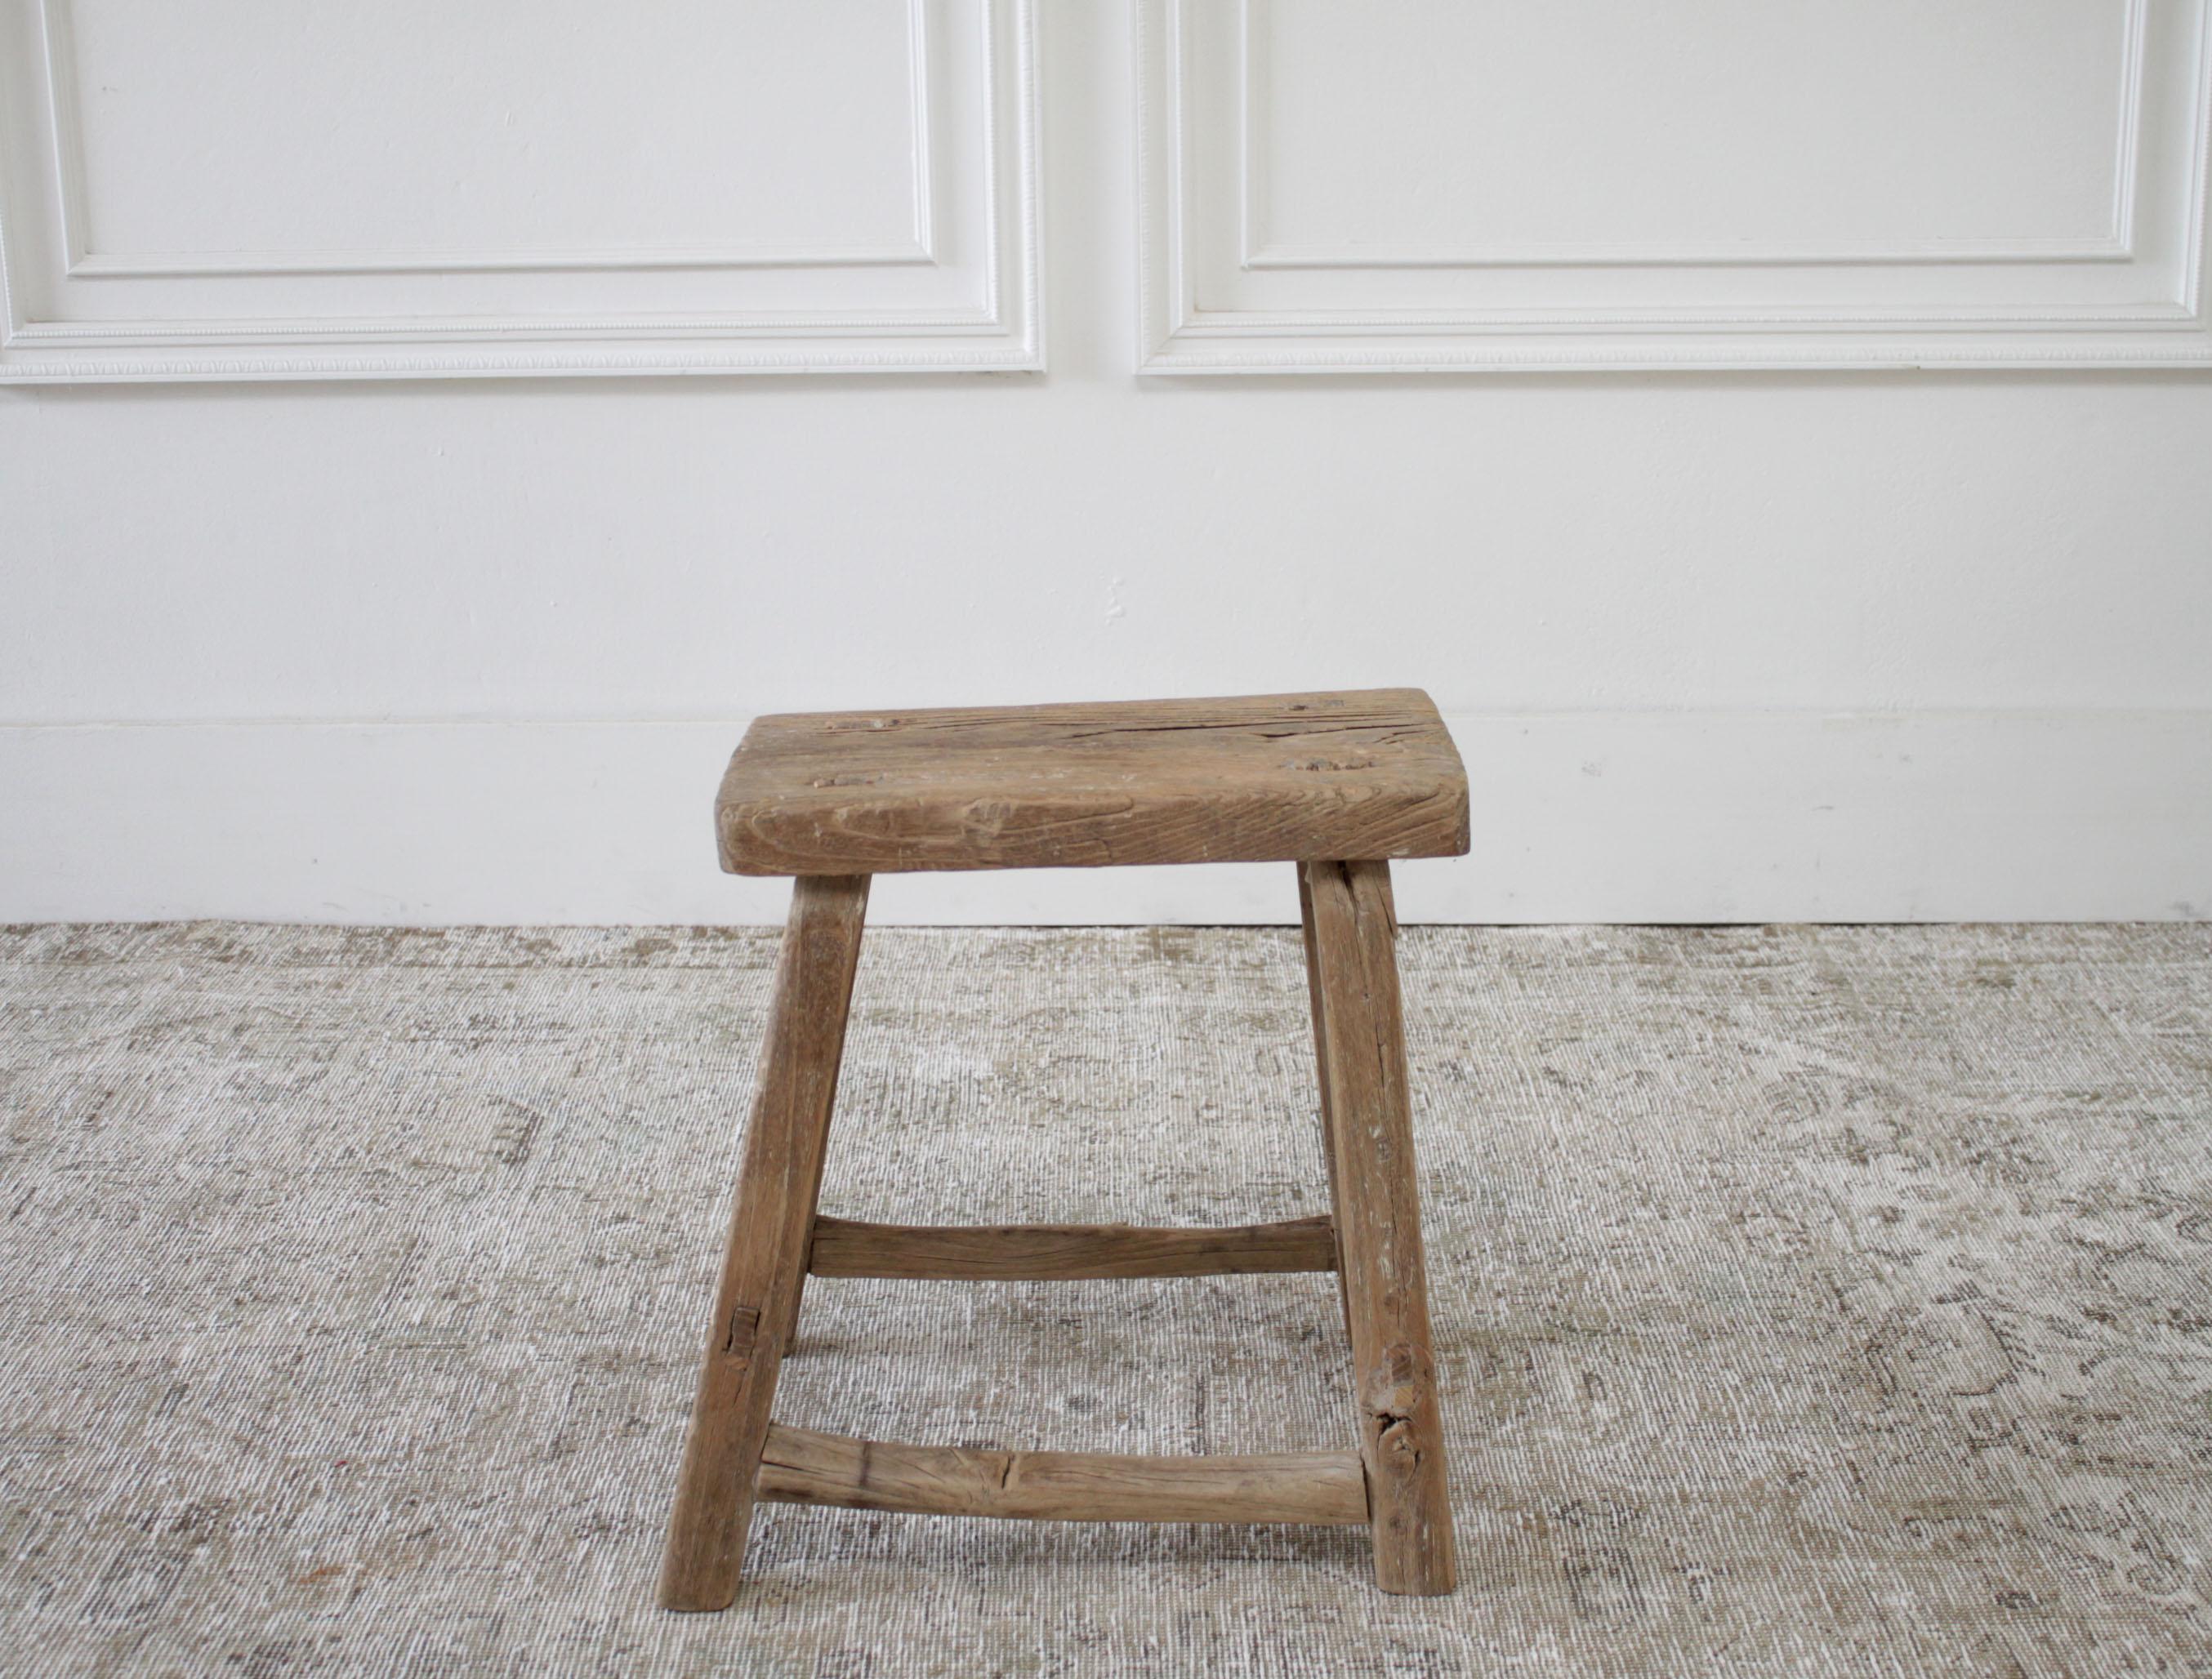 20th Century Antique Elm Wood Side Table or Stool